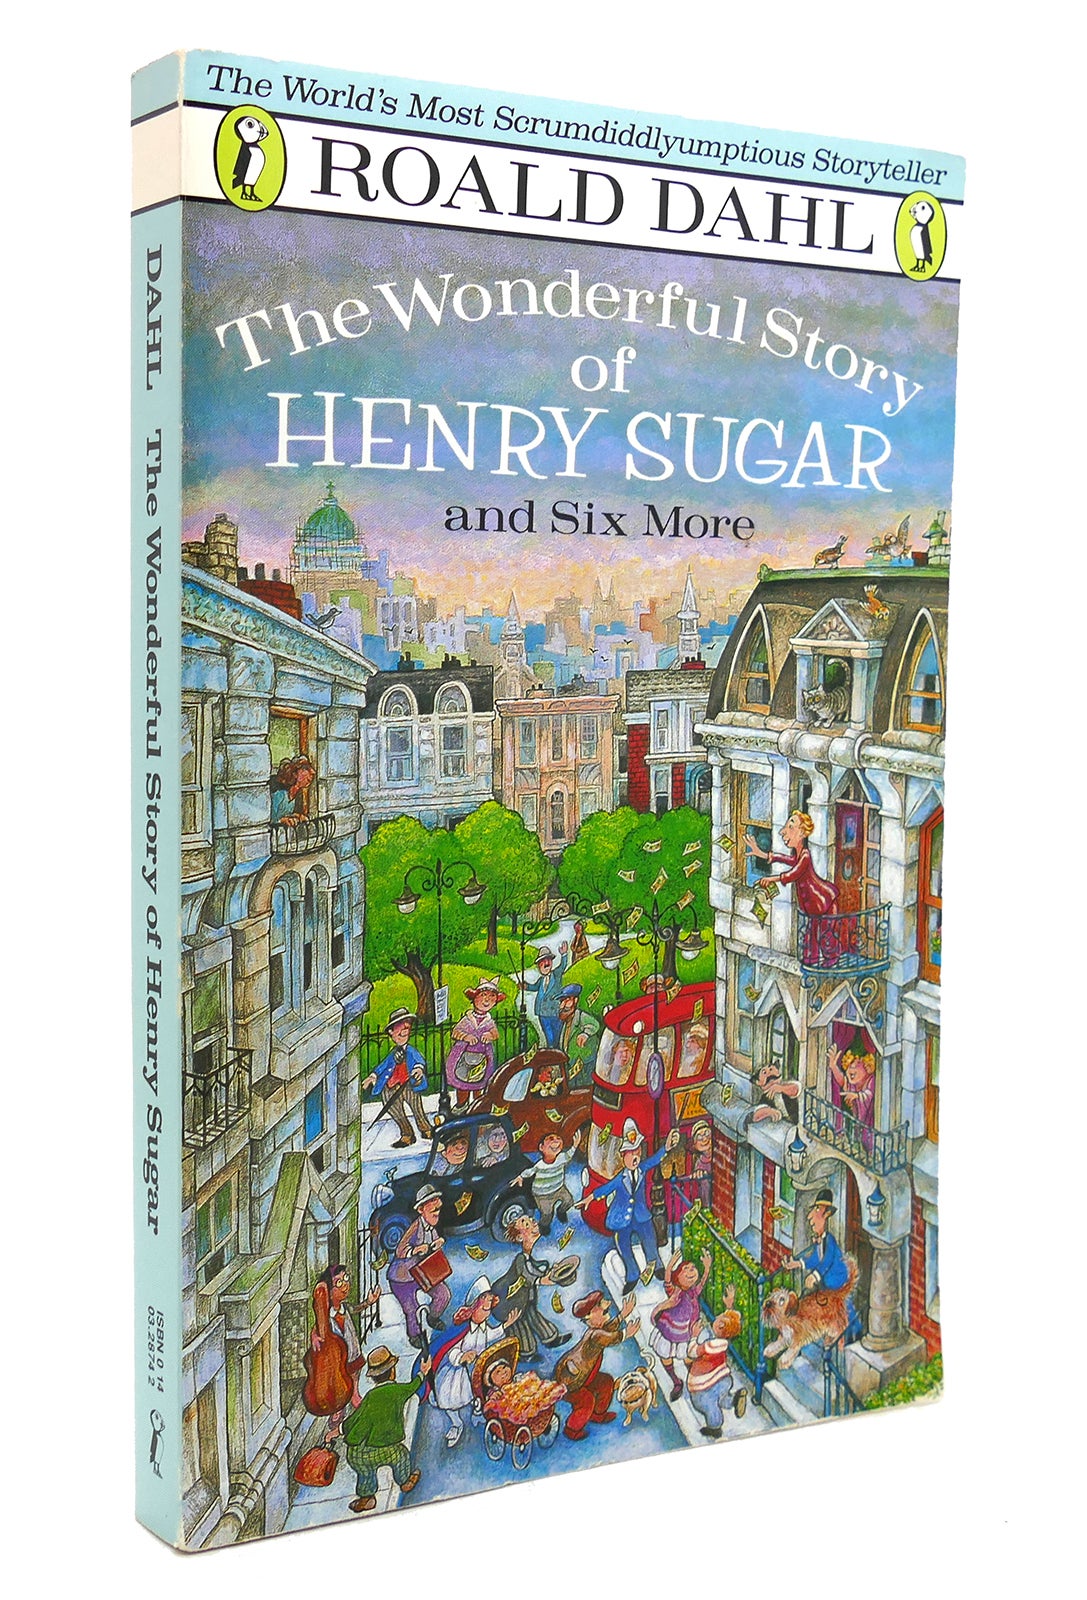 THE WONDERFUL STORY OF HENRY SUGAR AND SIX MORE Roald Dahl